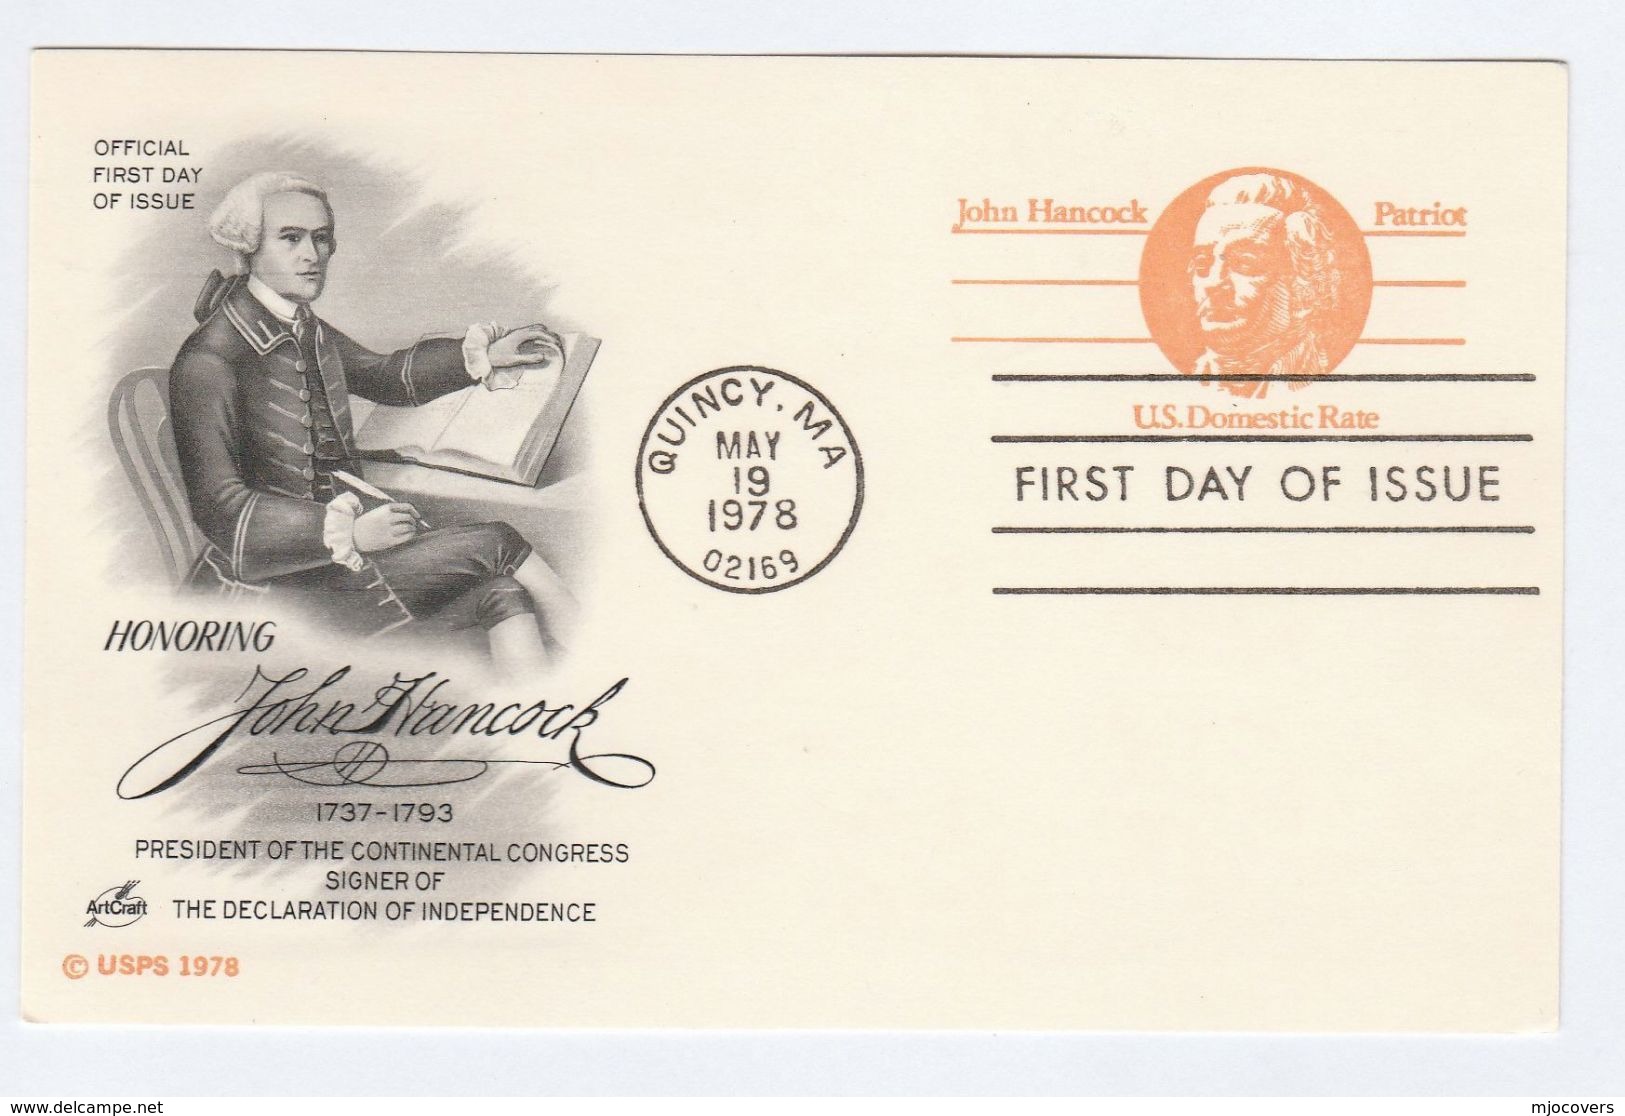 1978 Quincy USA Postal STATIONERY CARD (black)  FDC Illus JOHN HANCOCK  CONTINENTAL CONGRESS Stamps Cover Quill Pen - 1961-80